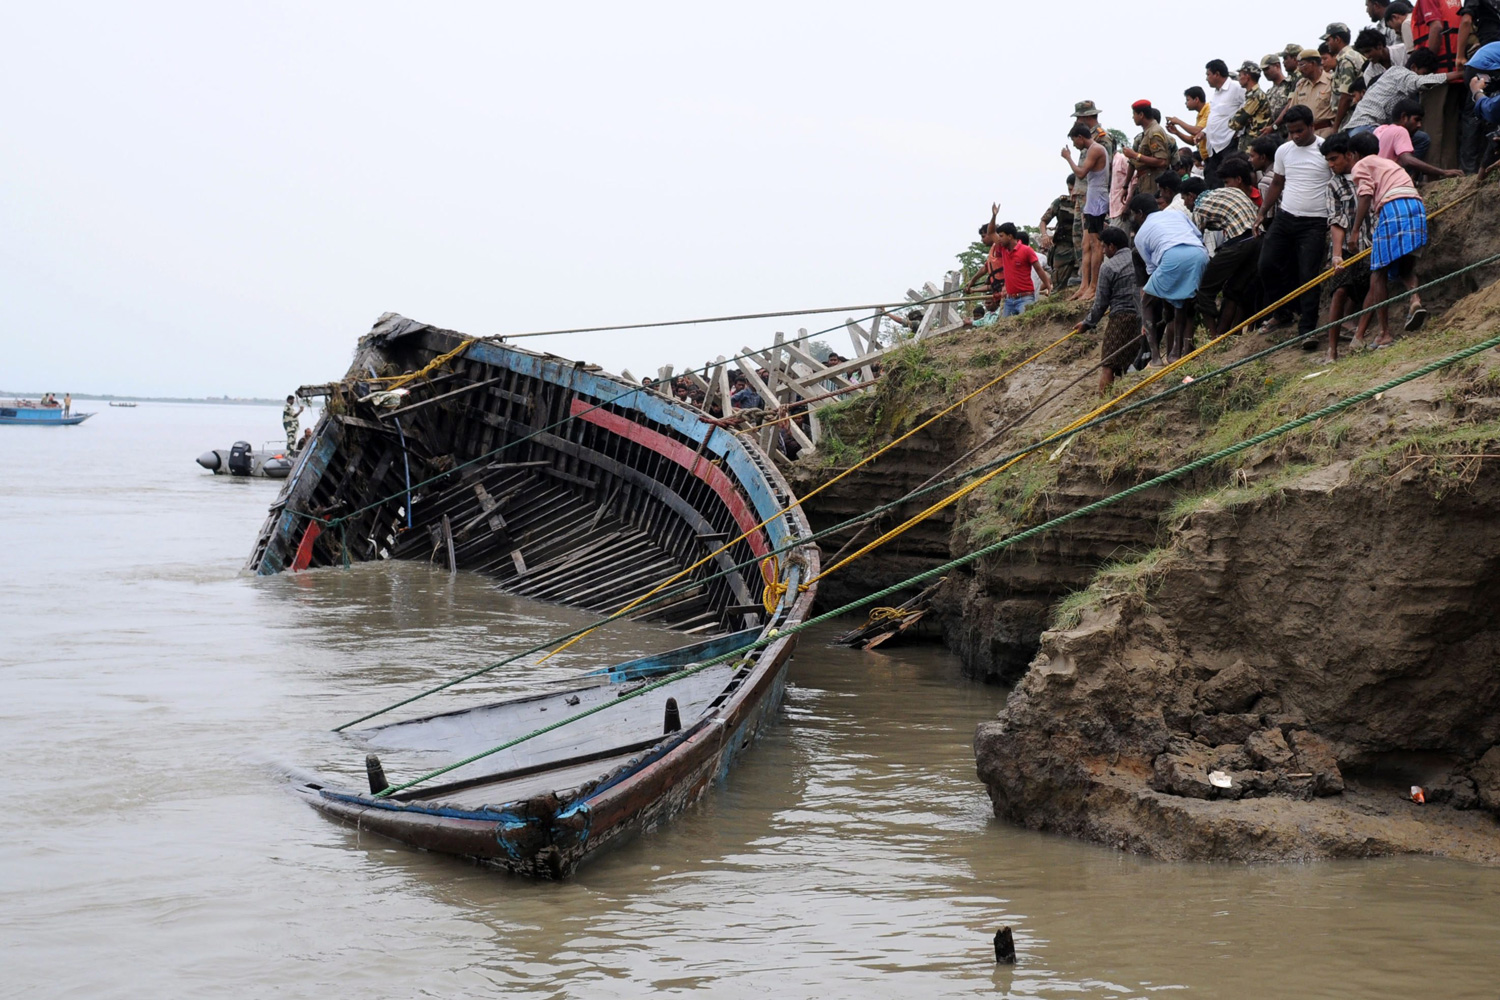 May 1, 2012. Villagers and Border Security Force (BSF) personnel engaged in a rescue operation for a capsized boat at the Brahmaputra River in Bura-Buri village in the Goalpara district of Assam state, northeast India.